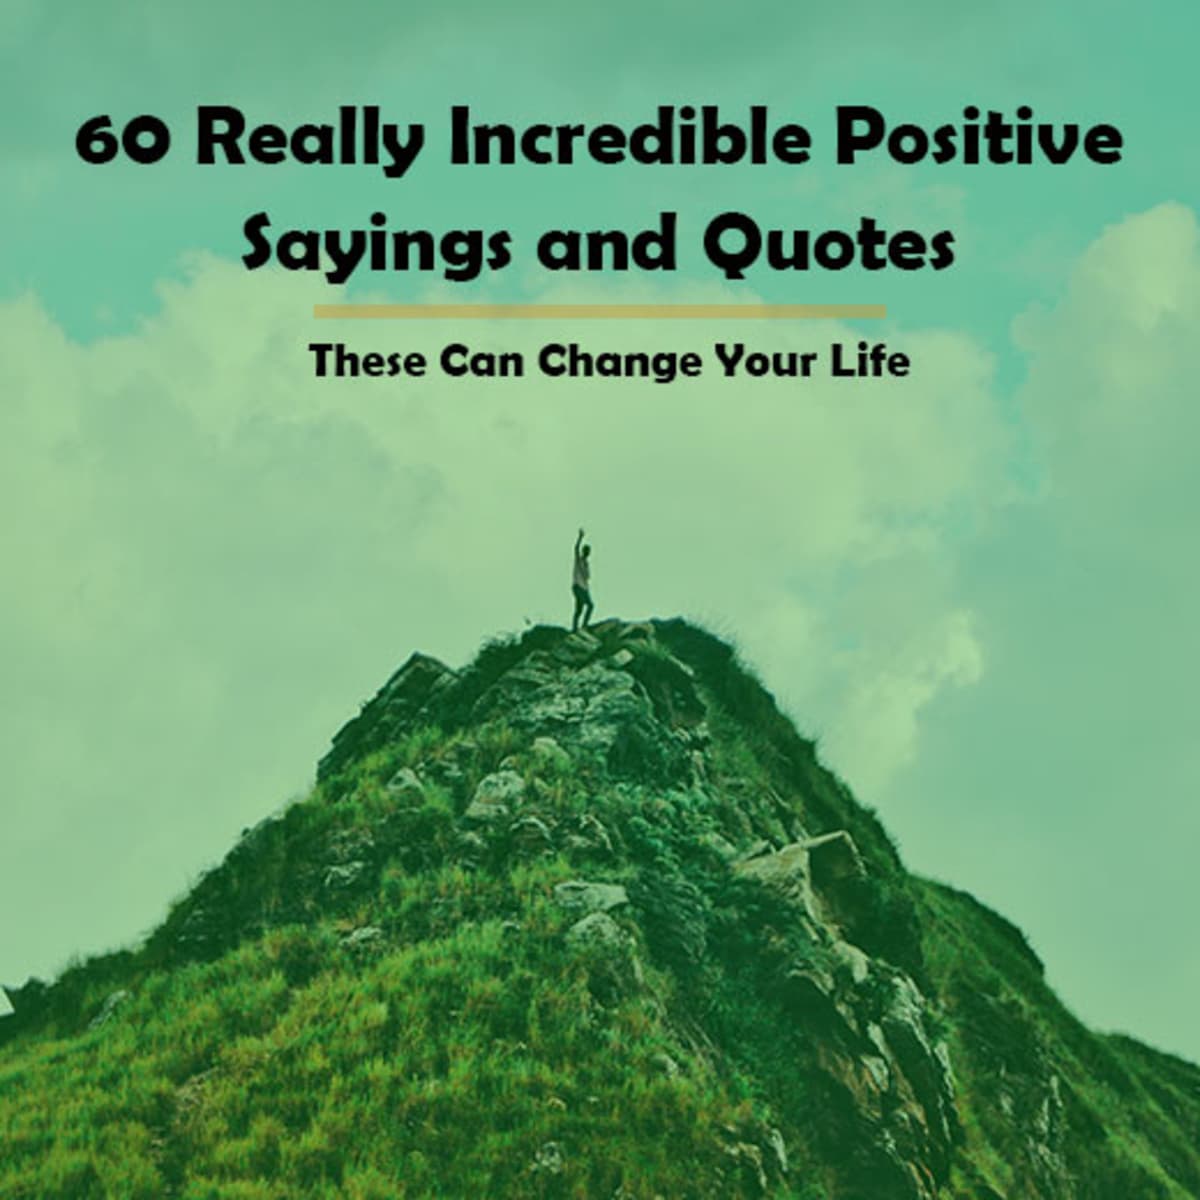 positive changes quotes